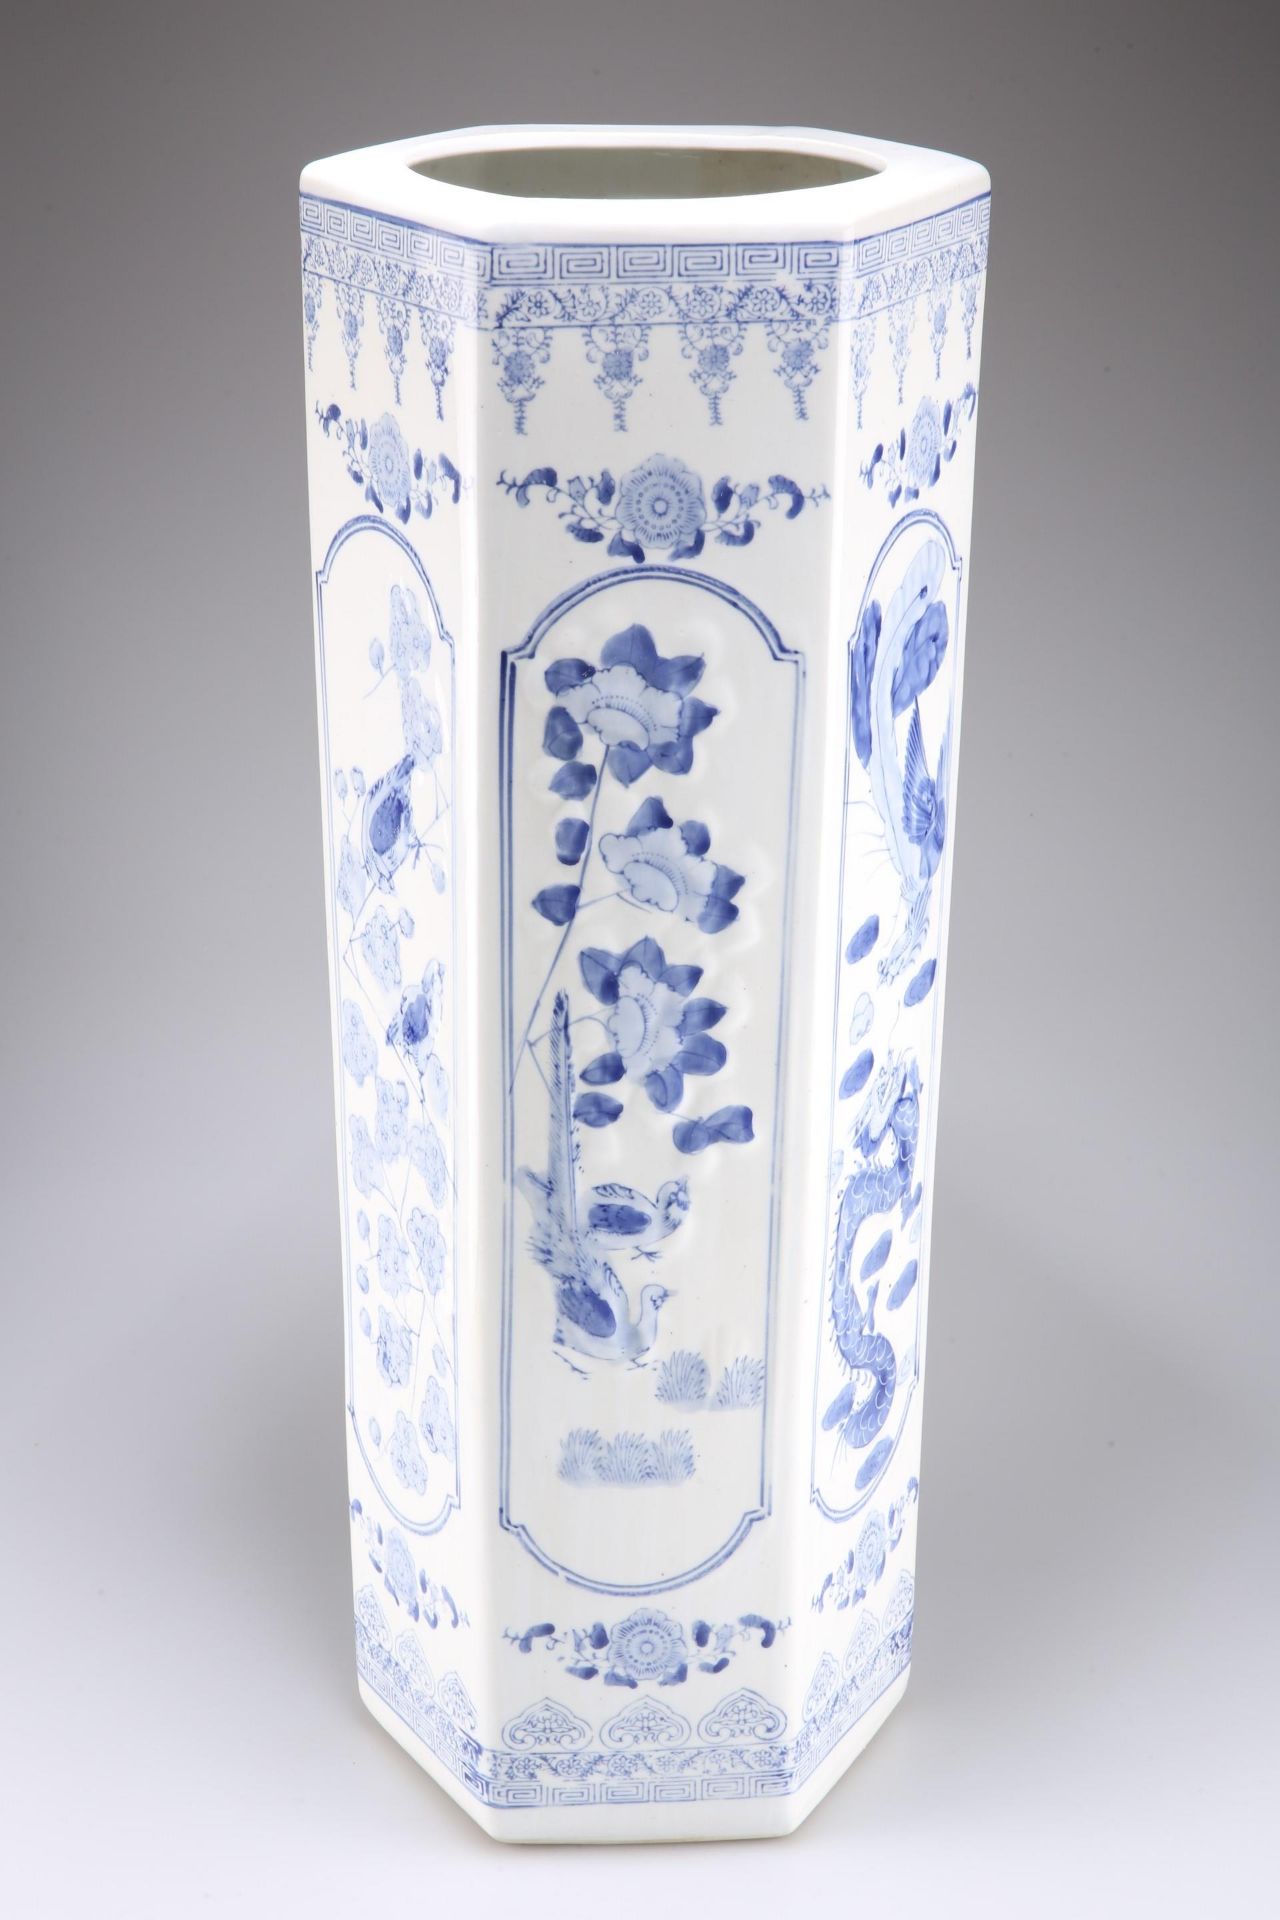 Oriental blue and white stickstand - Image 2 of 7